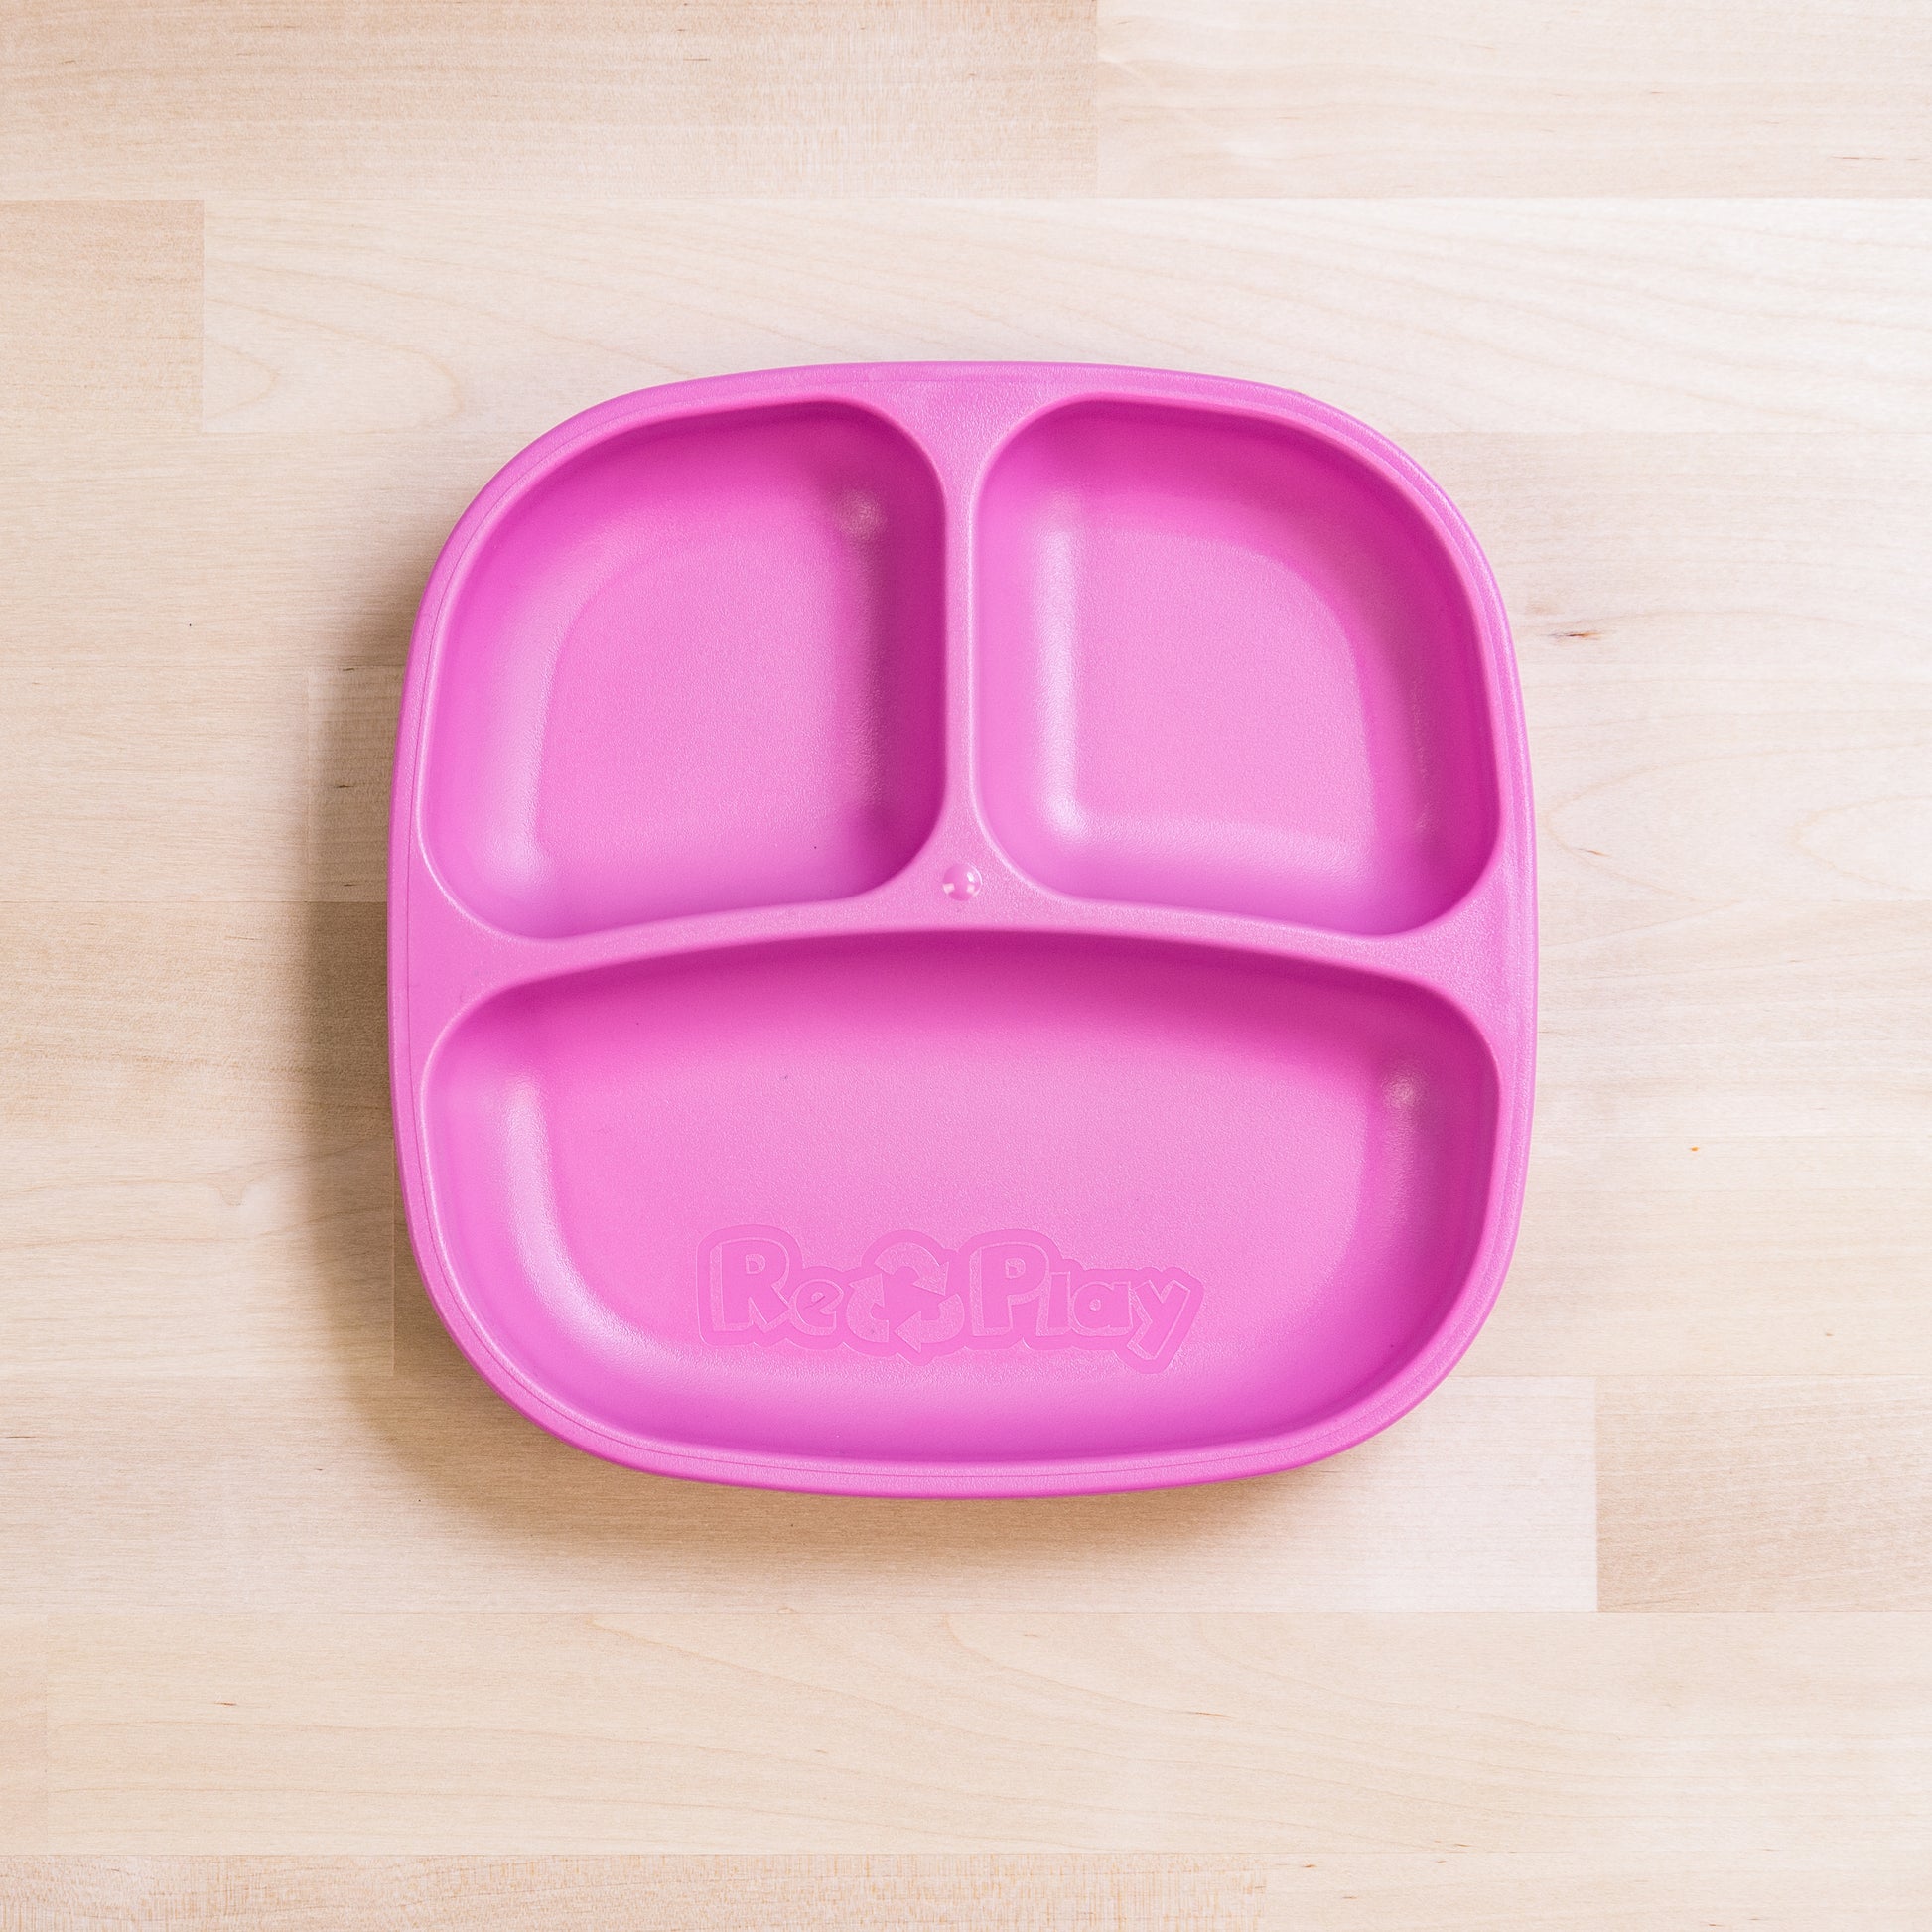 Re-Play Divided Plate 7" plate in Bright Pink from Bear & Moo